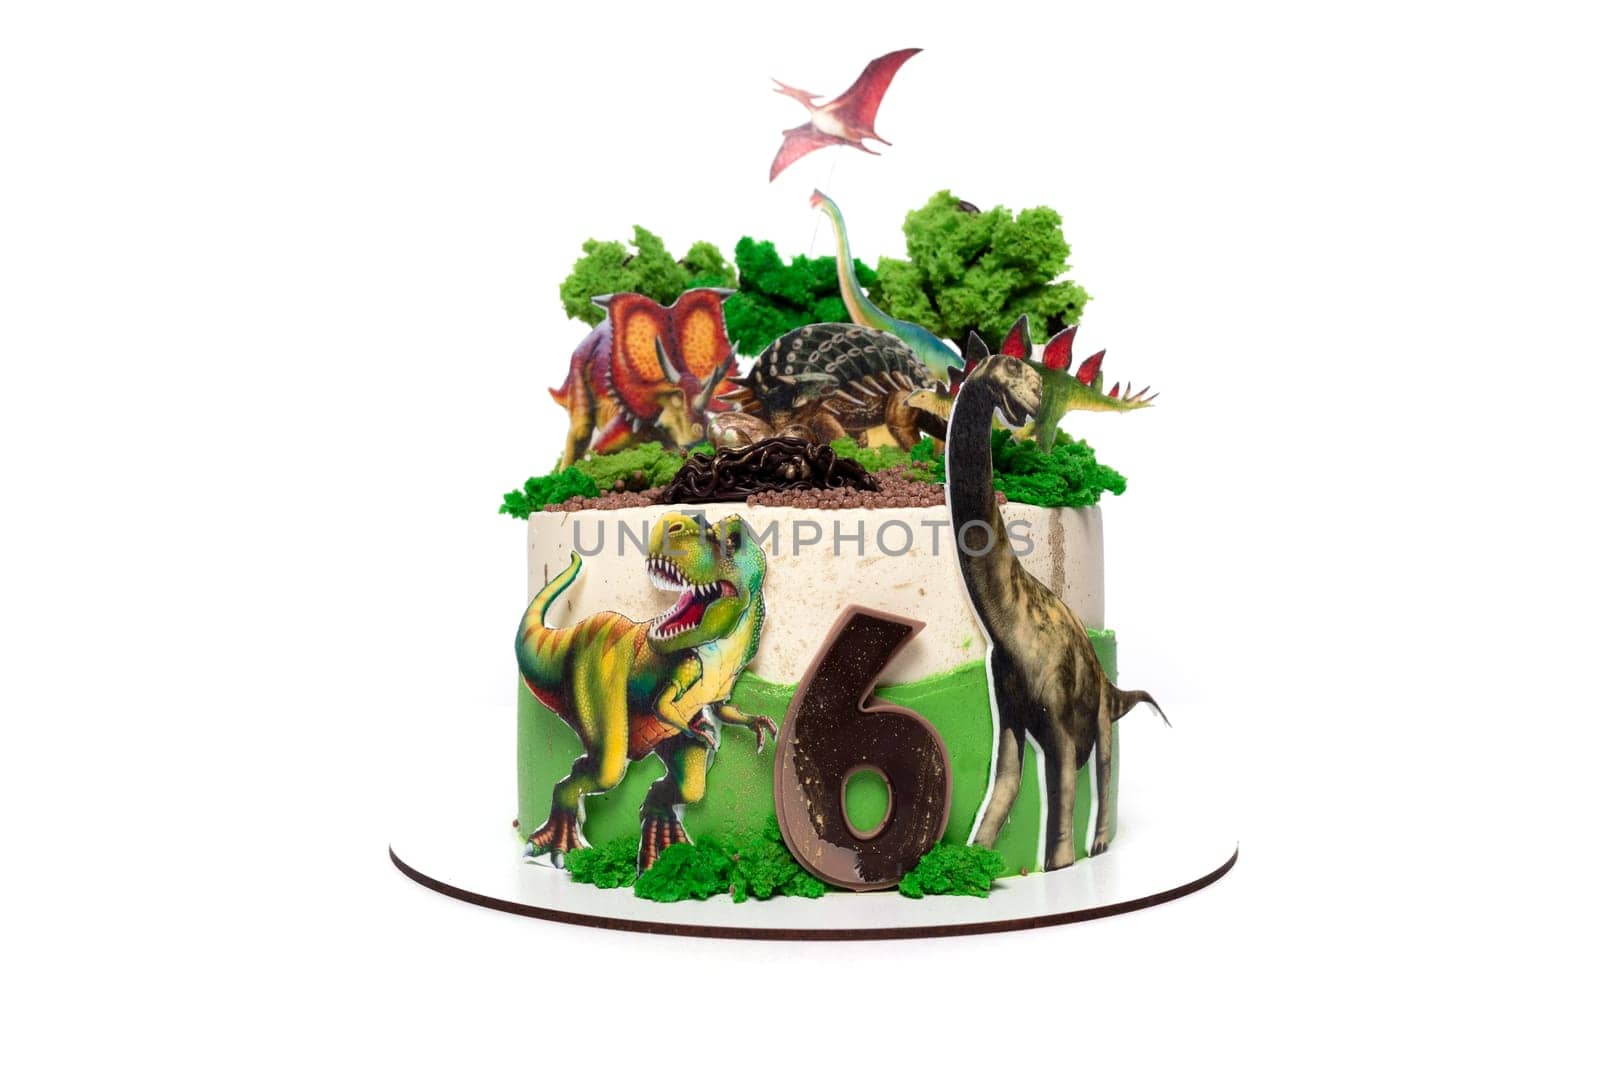 Dinosaur and Plant Decorated Birthday Cake by TRMK